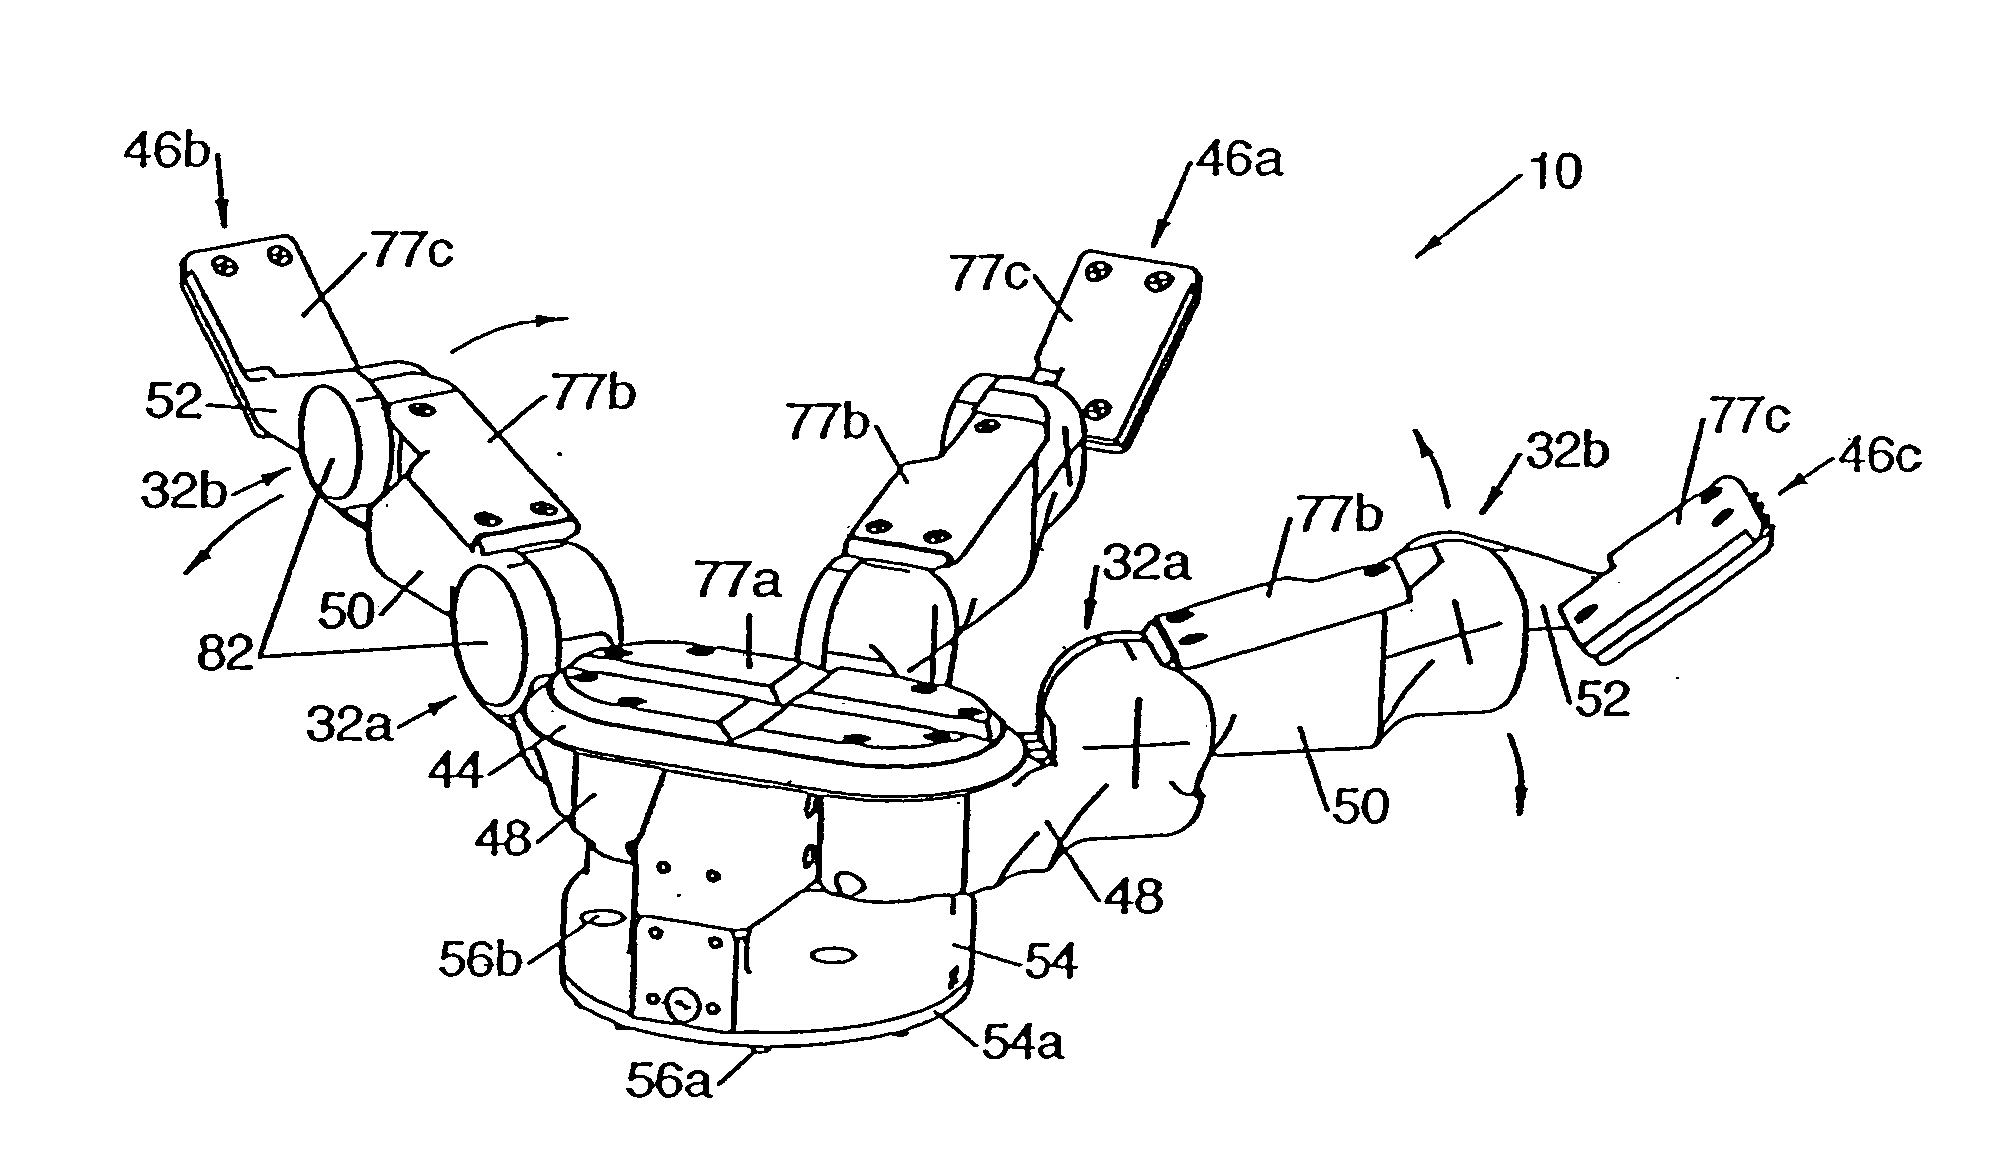 Process for anodizing a robotic device